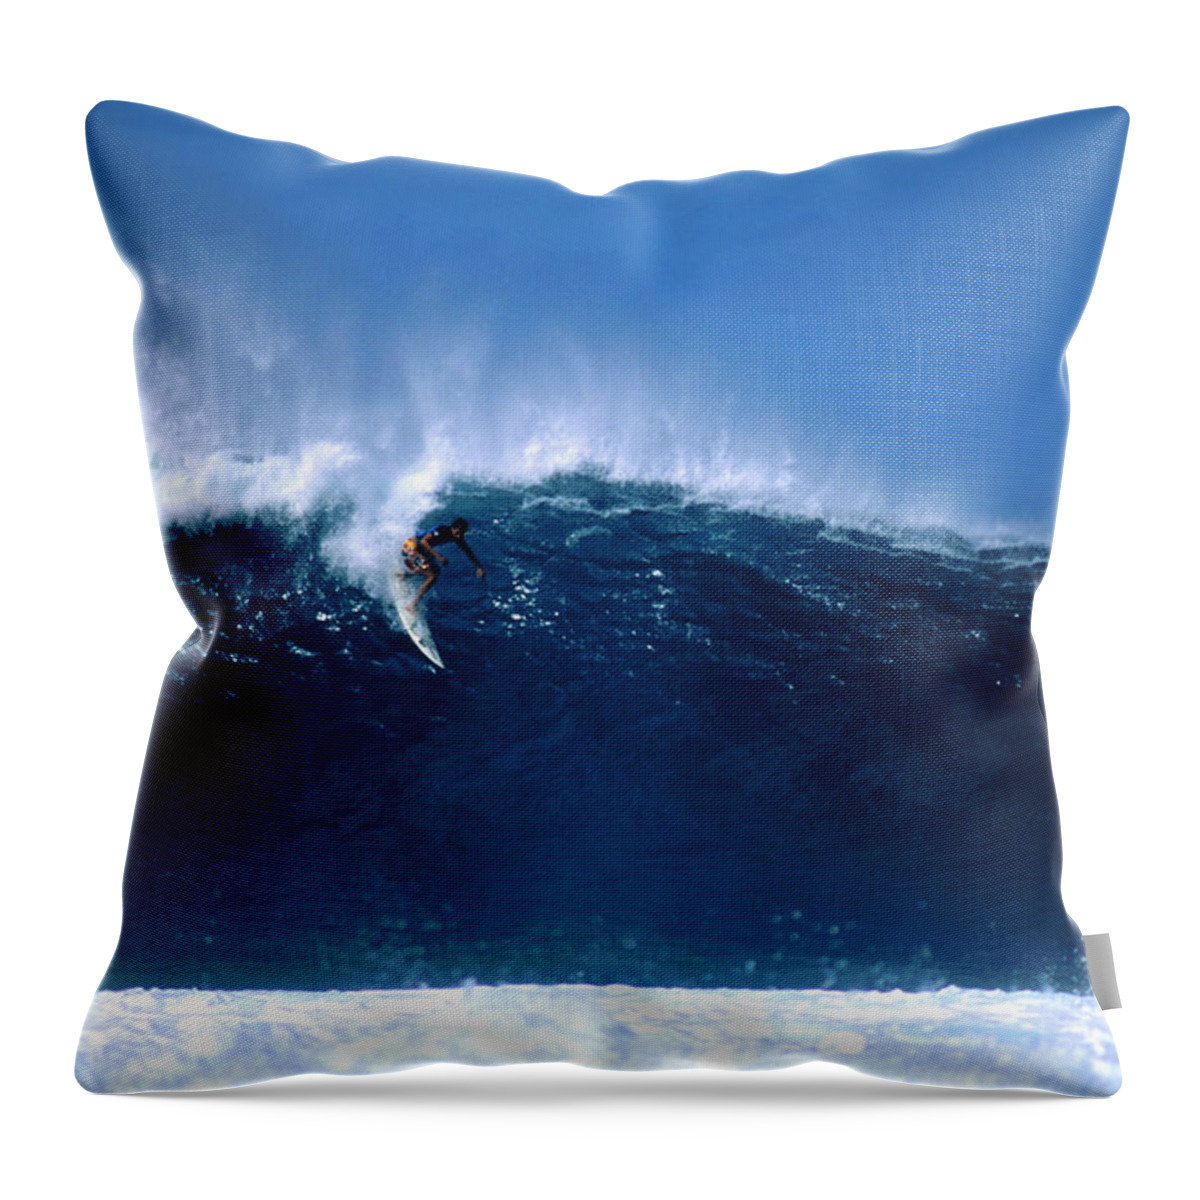 Waimea Bay Throw Pillow featuring the photograph Surfer Dropping In At Big Pipeline by Drewhadley